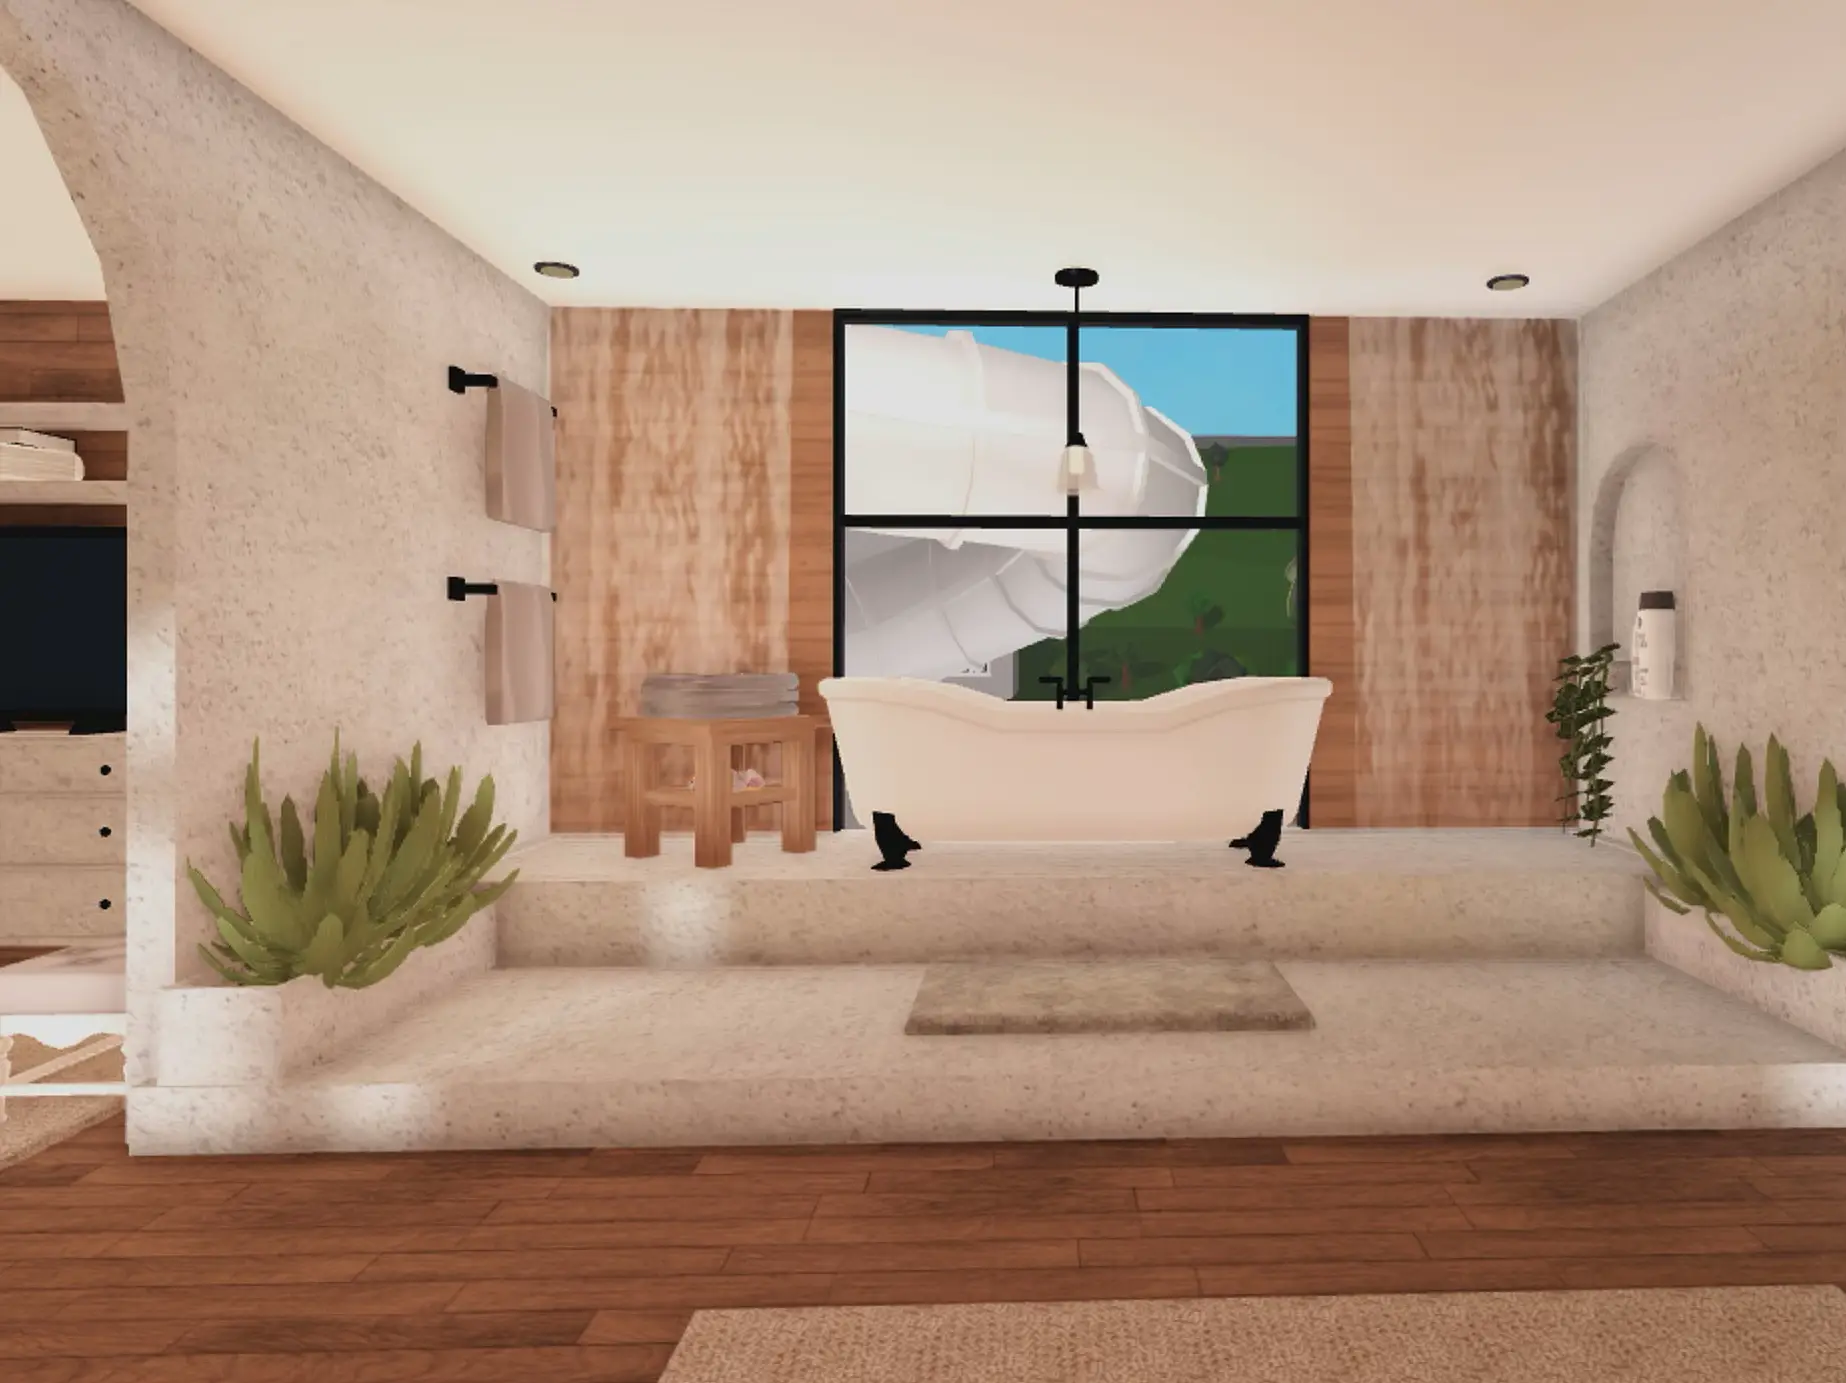 My Bloxburg House, Gallery posted by Mia